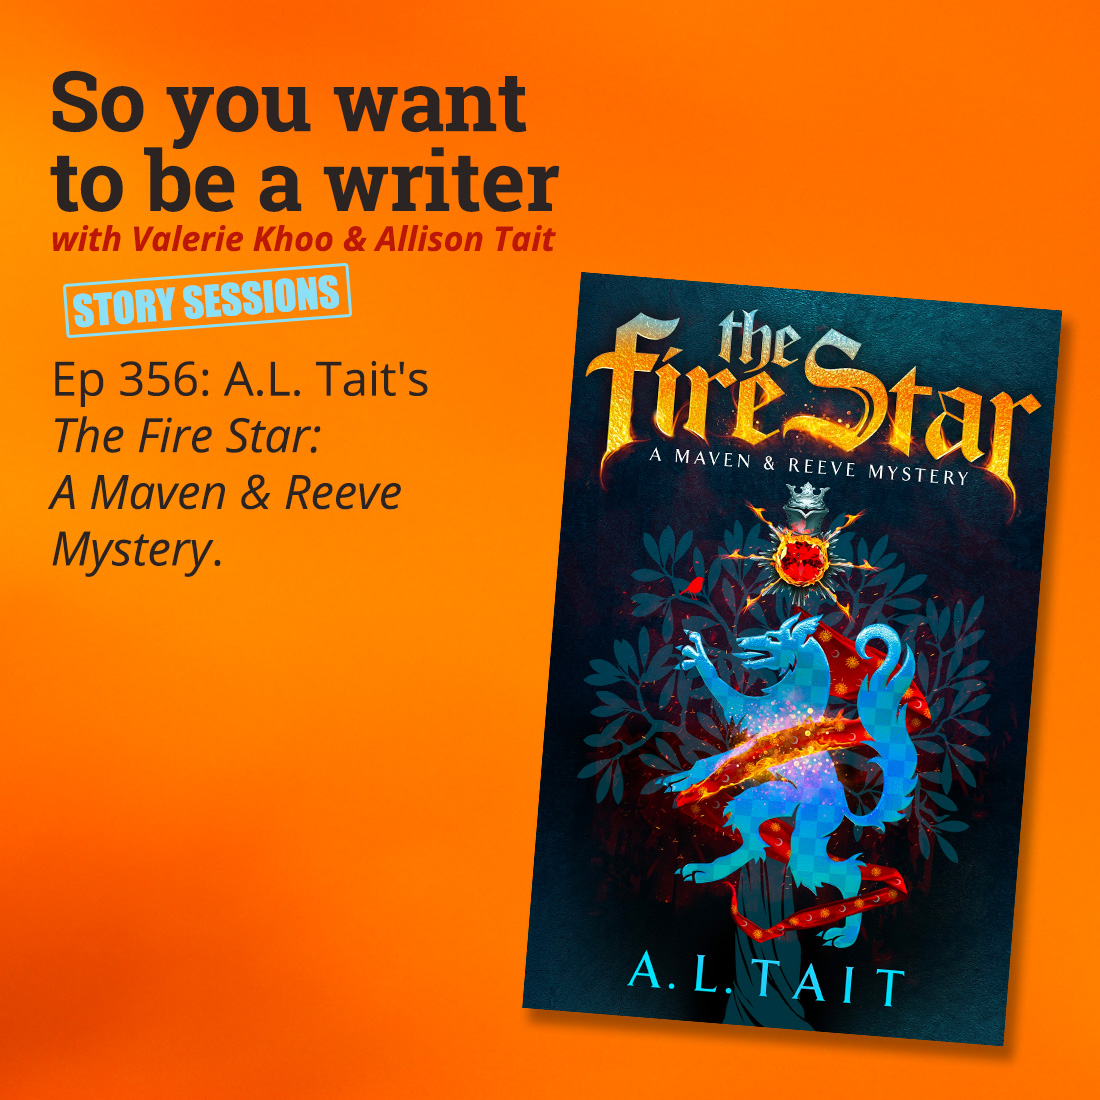 WRITER 356: A.L. Tait's 'The Firestar: A Maven & Reeve Mystery' [Story Sessions series]